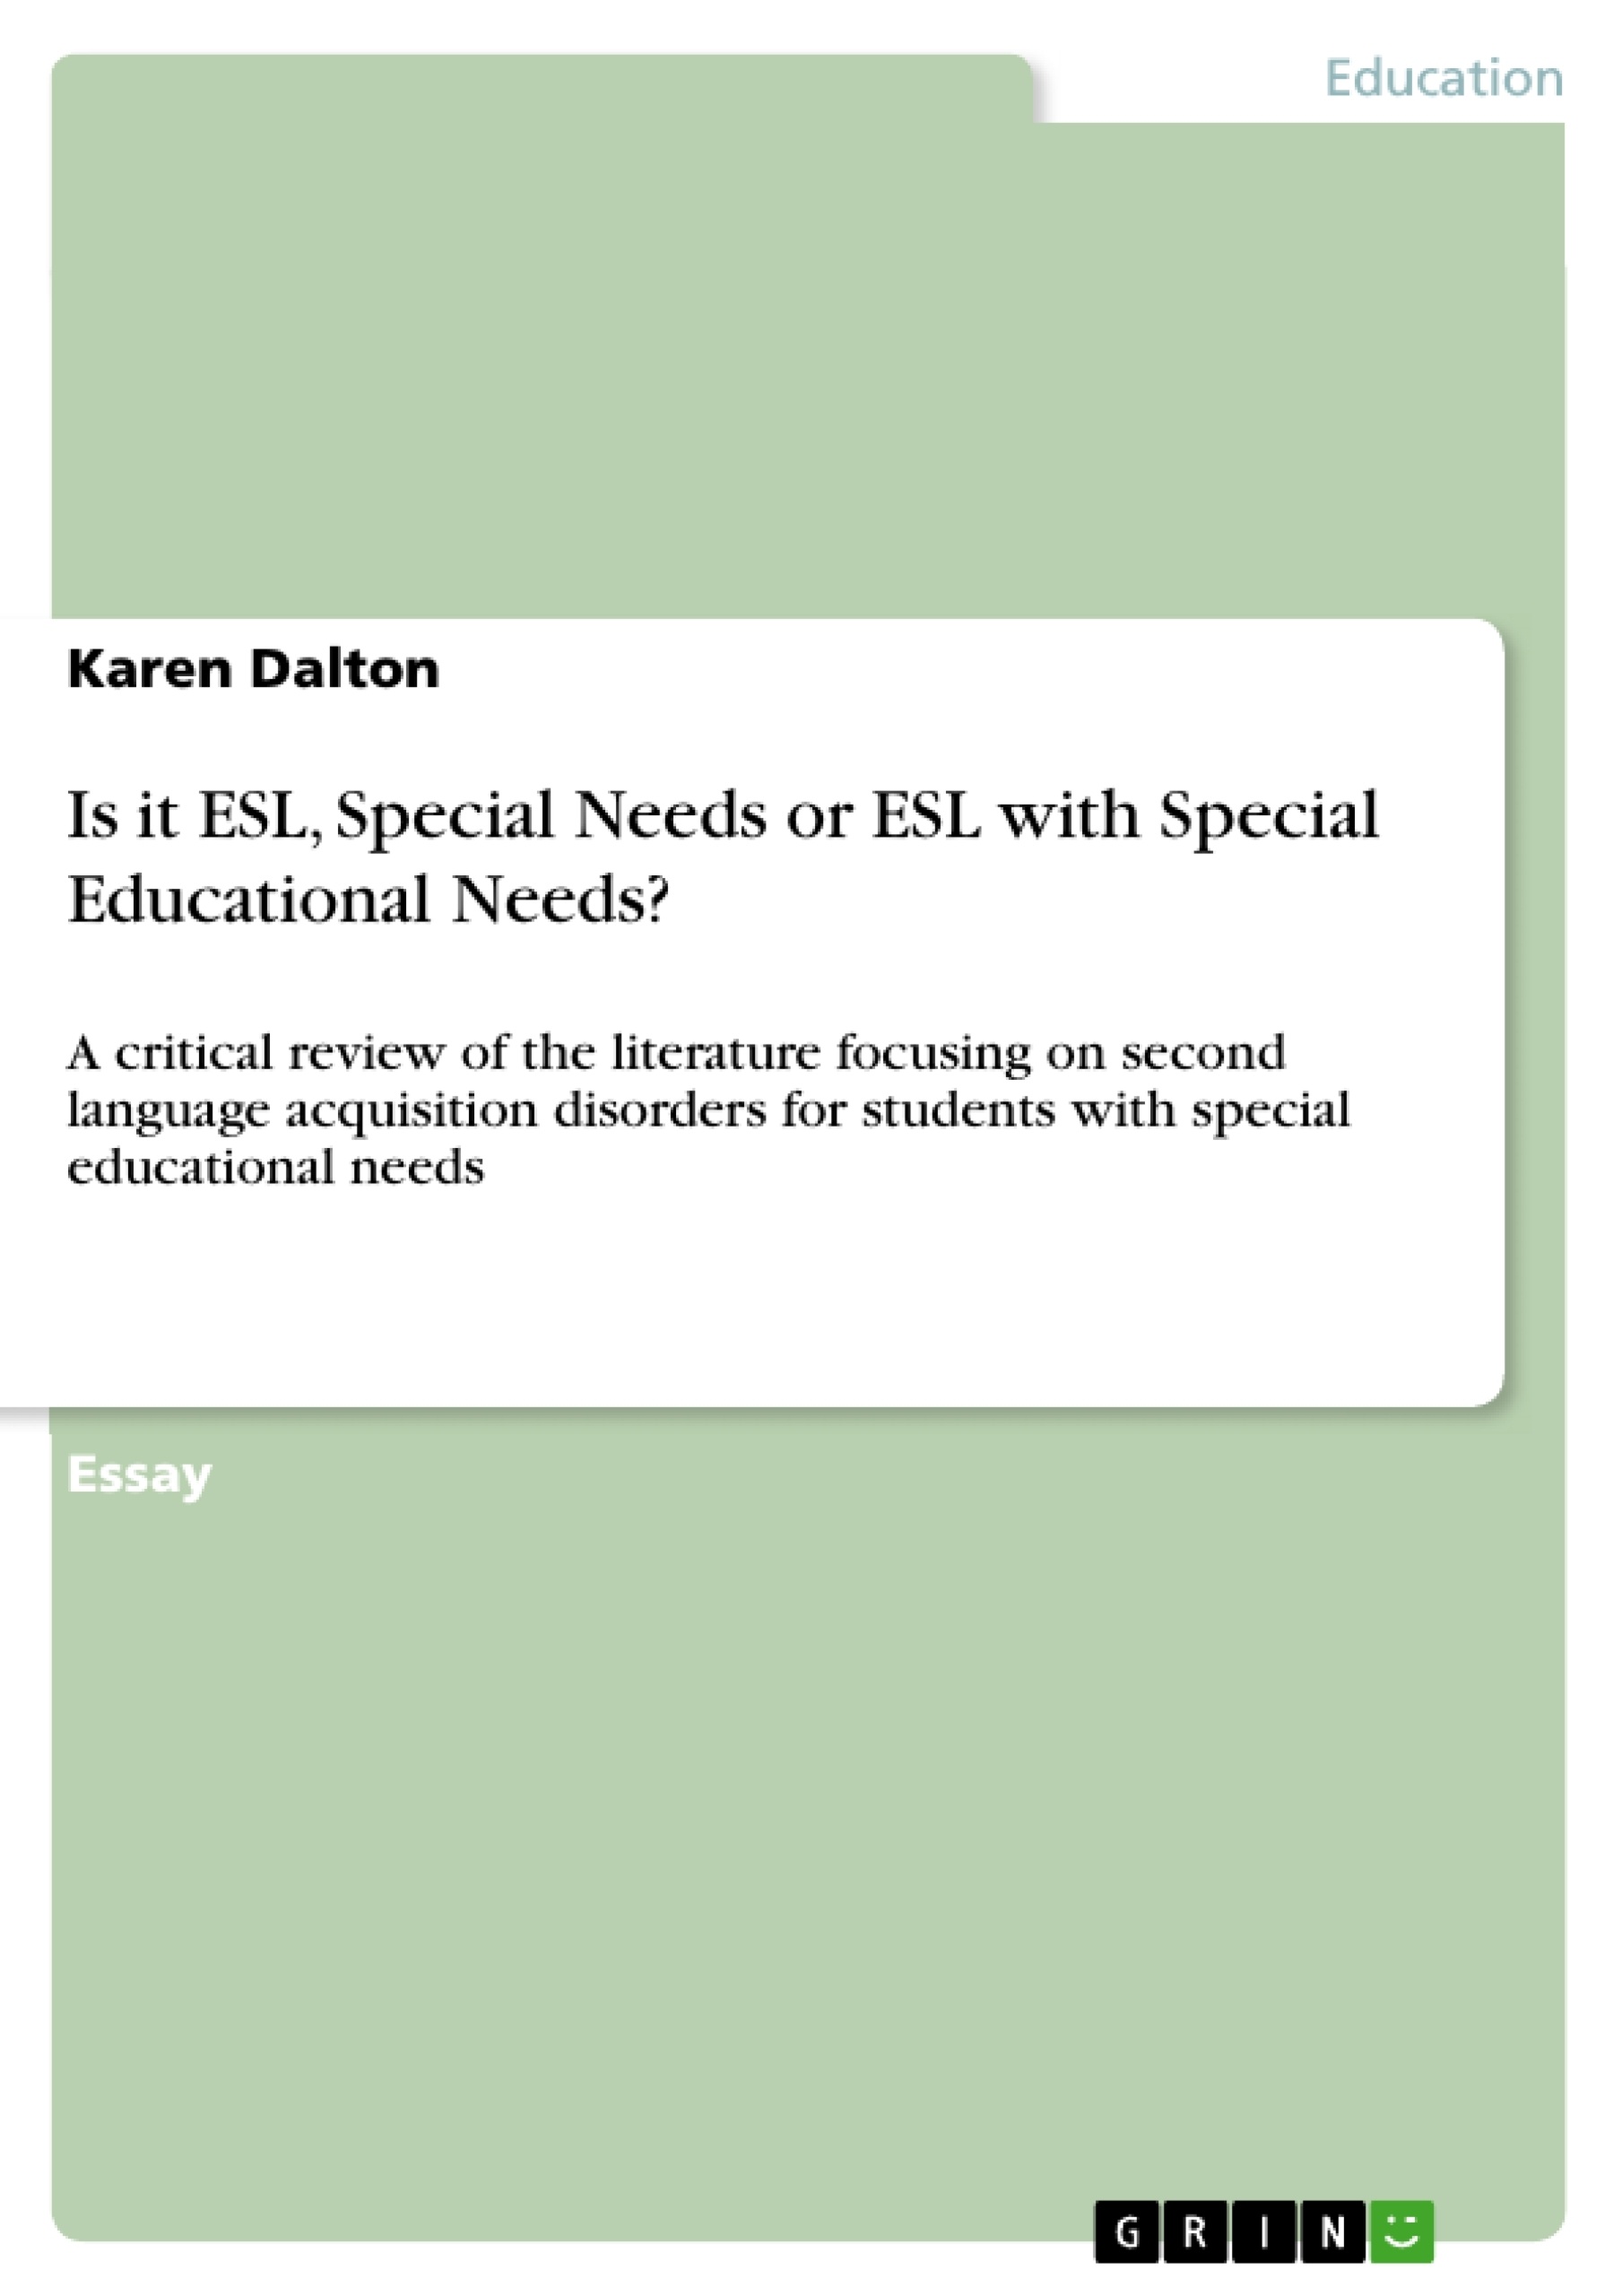 Titre: Is it ESL, Special Needs or ESL with Special Educational Needs?